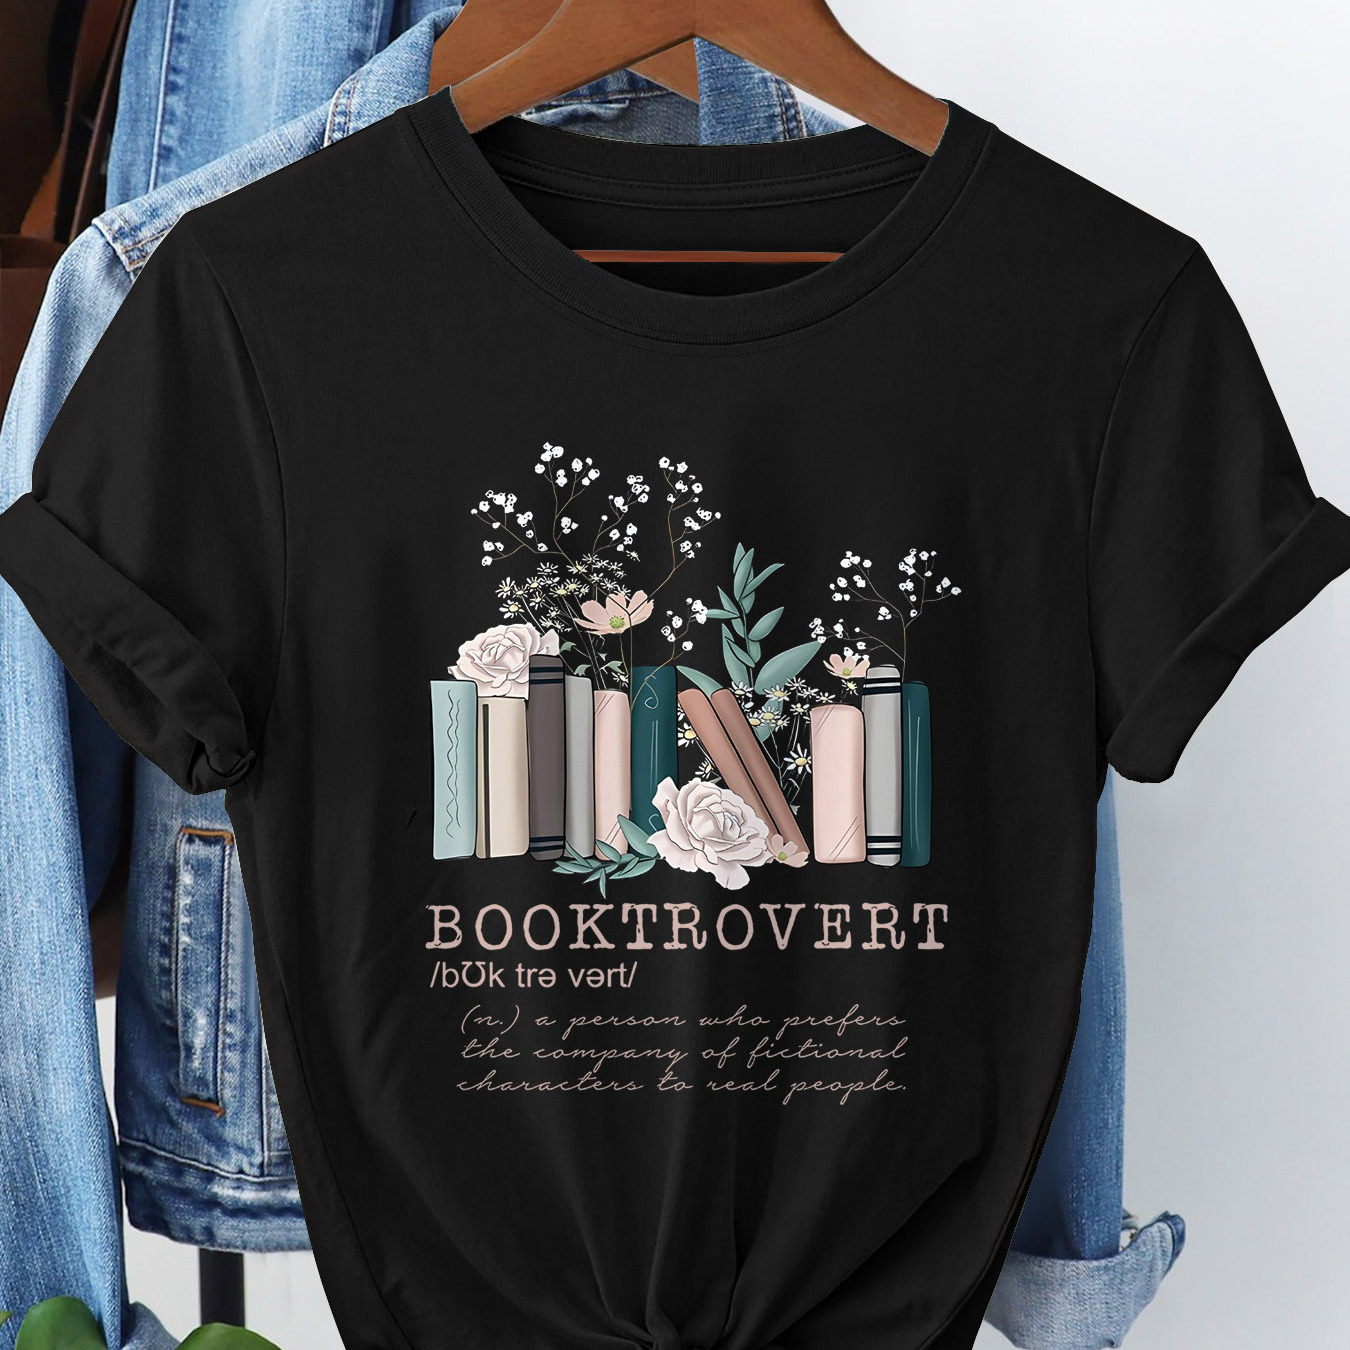 

Book Print T-shirt, Short Sleeve Crew Neck Casual Top For Summer & Spring, Women's Clothing